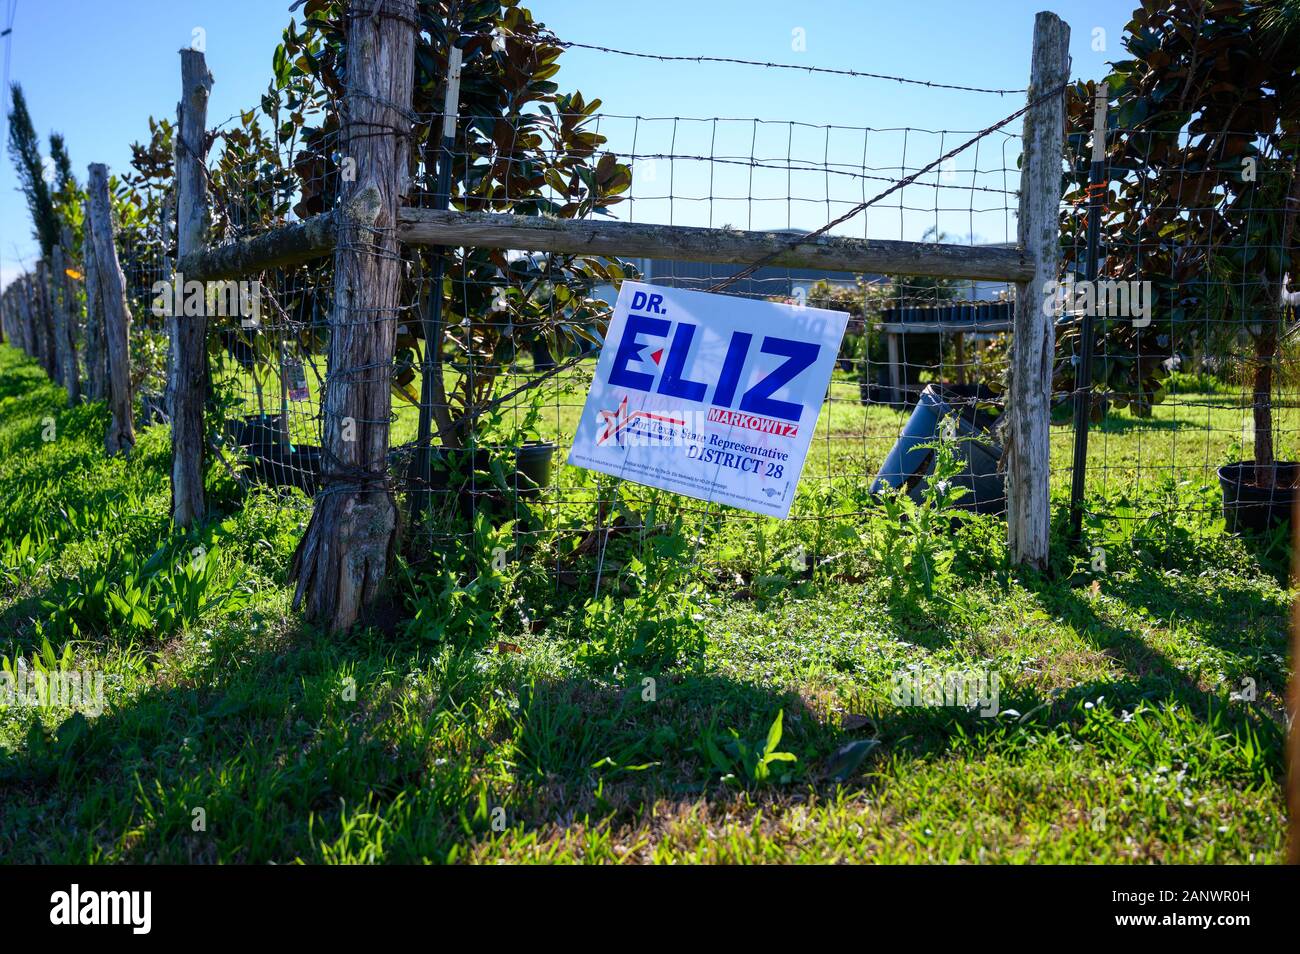 Orchard, Texas - January 19, 2020: Political campaign sign of Democrat Eliz Markowitz for the Texas State Representative House District 28 special ele Stock Photo